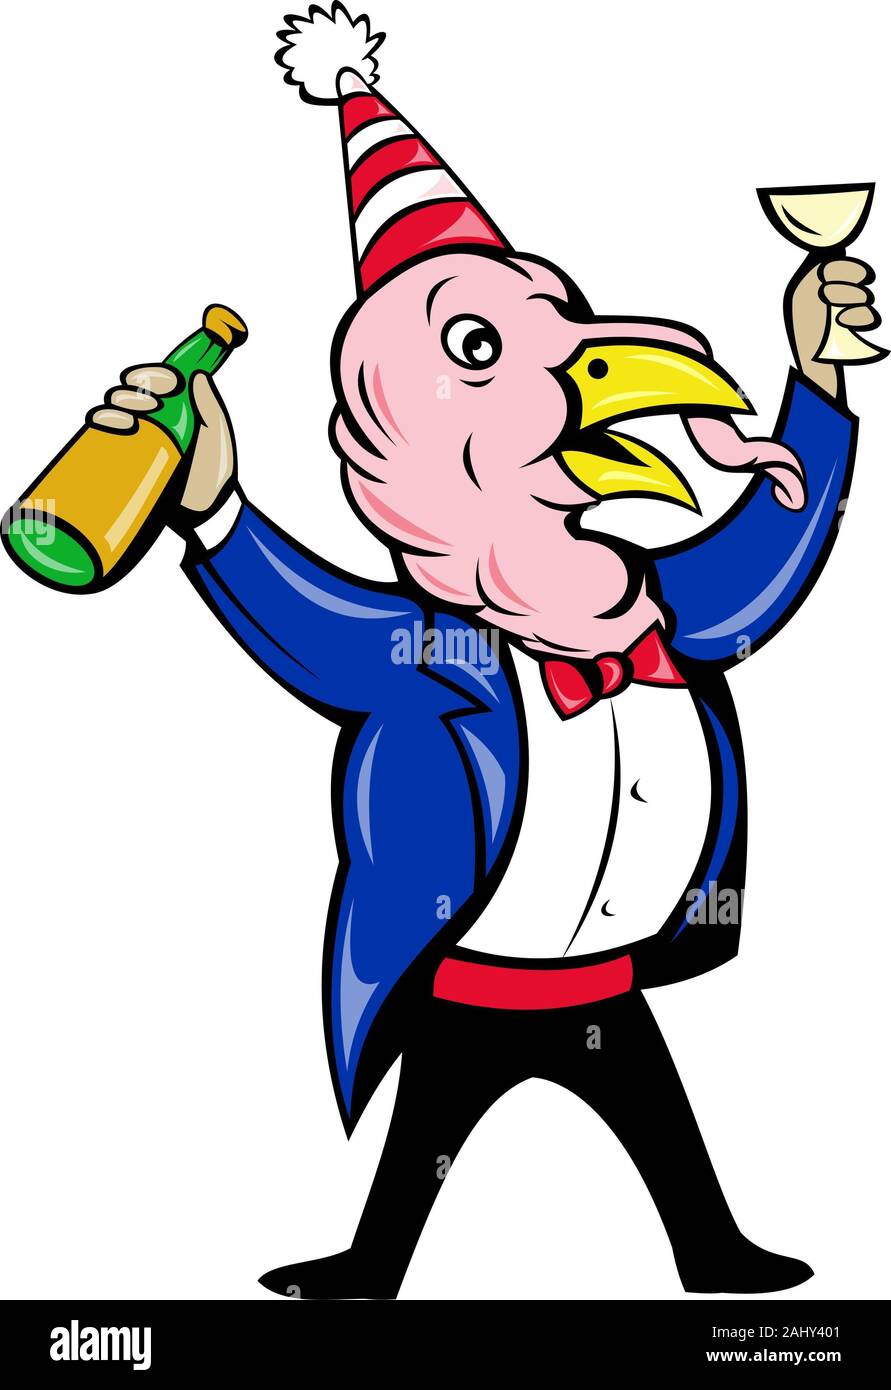 illustration of a cartoon turkey in tie and suit holding wine bottle and glass offering a toast isolated on white. Stock Photo